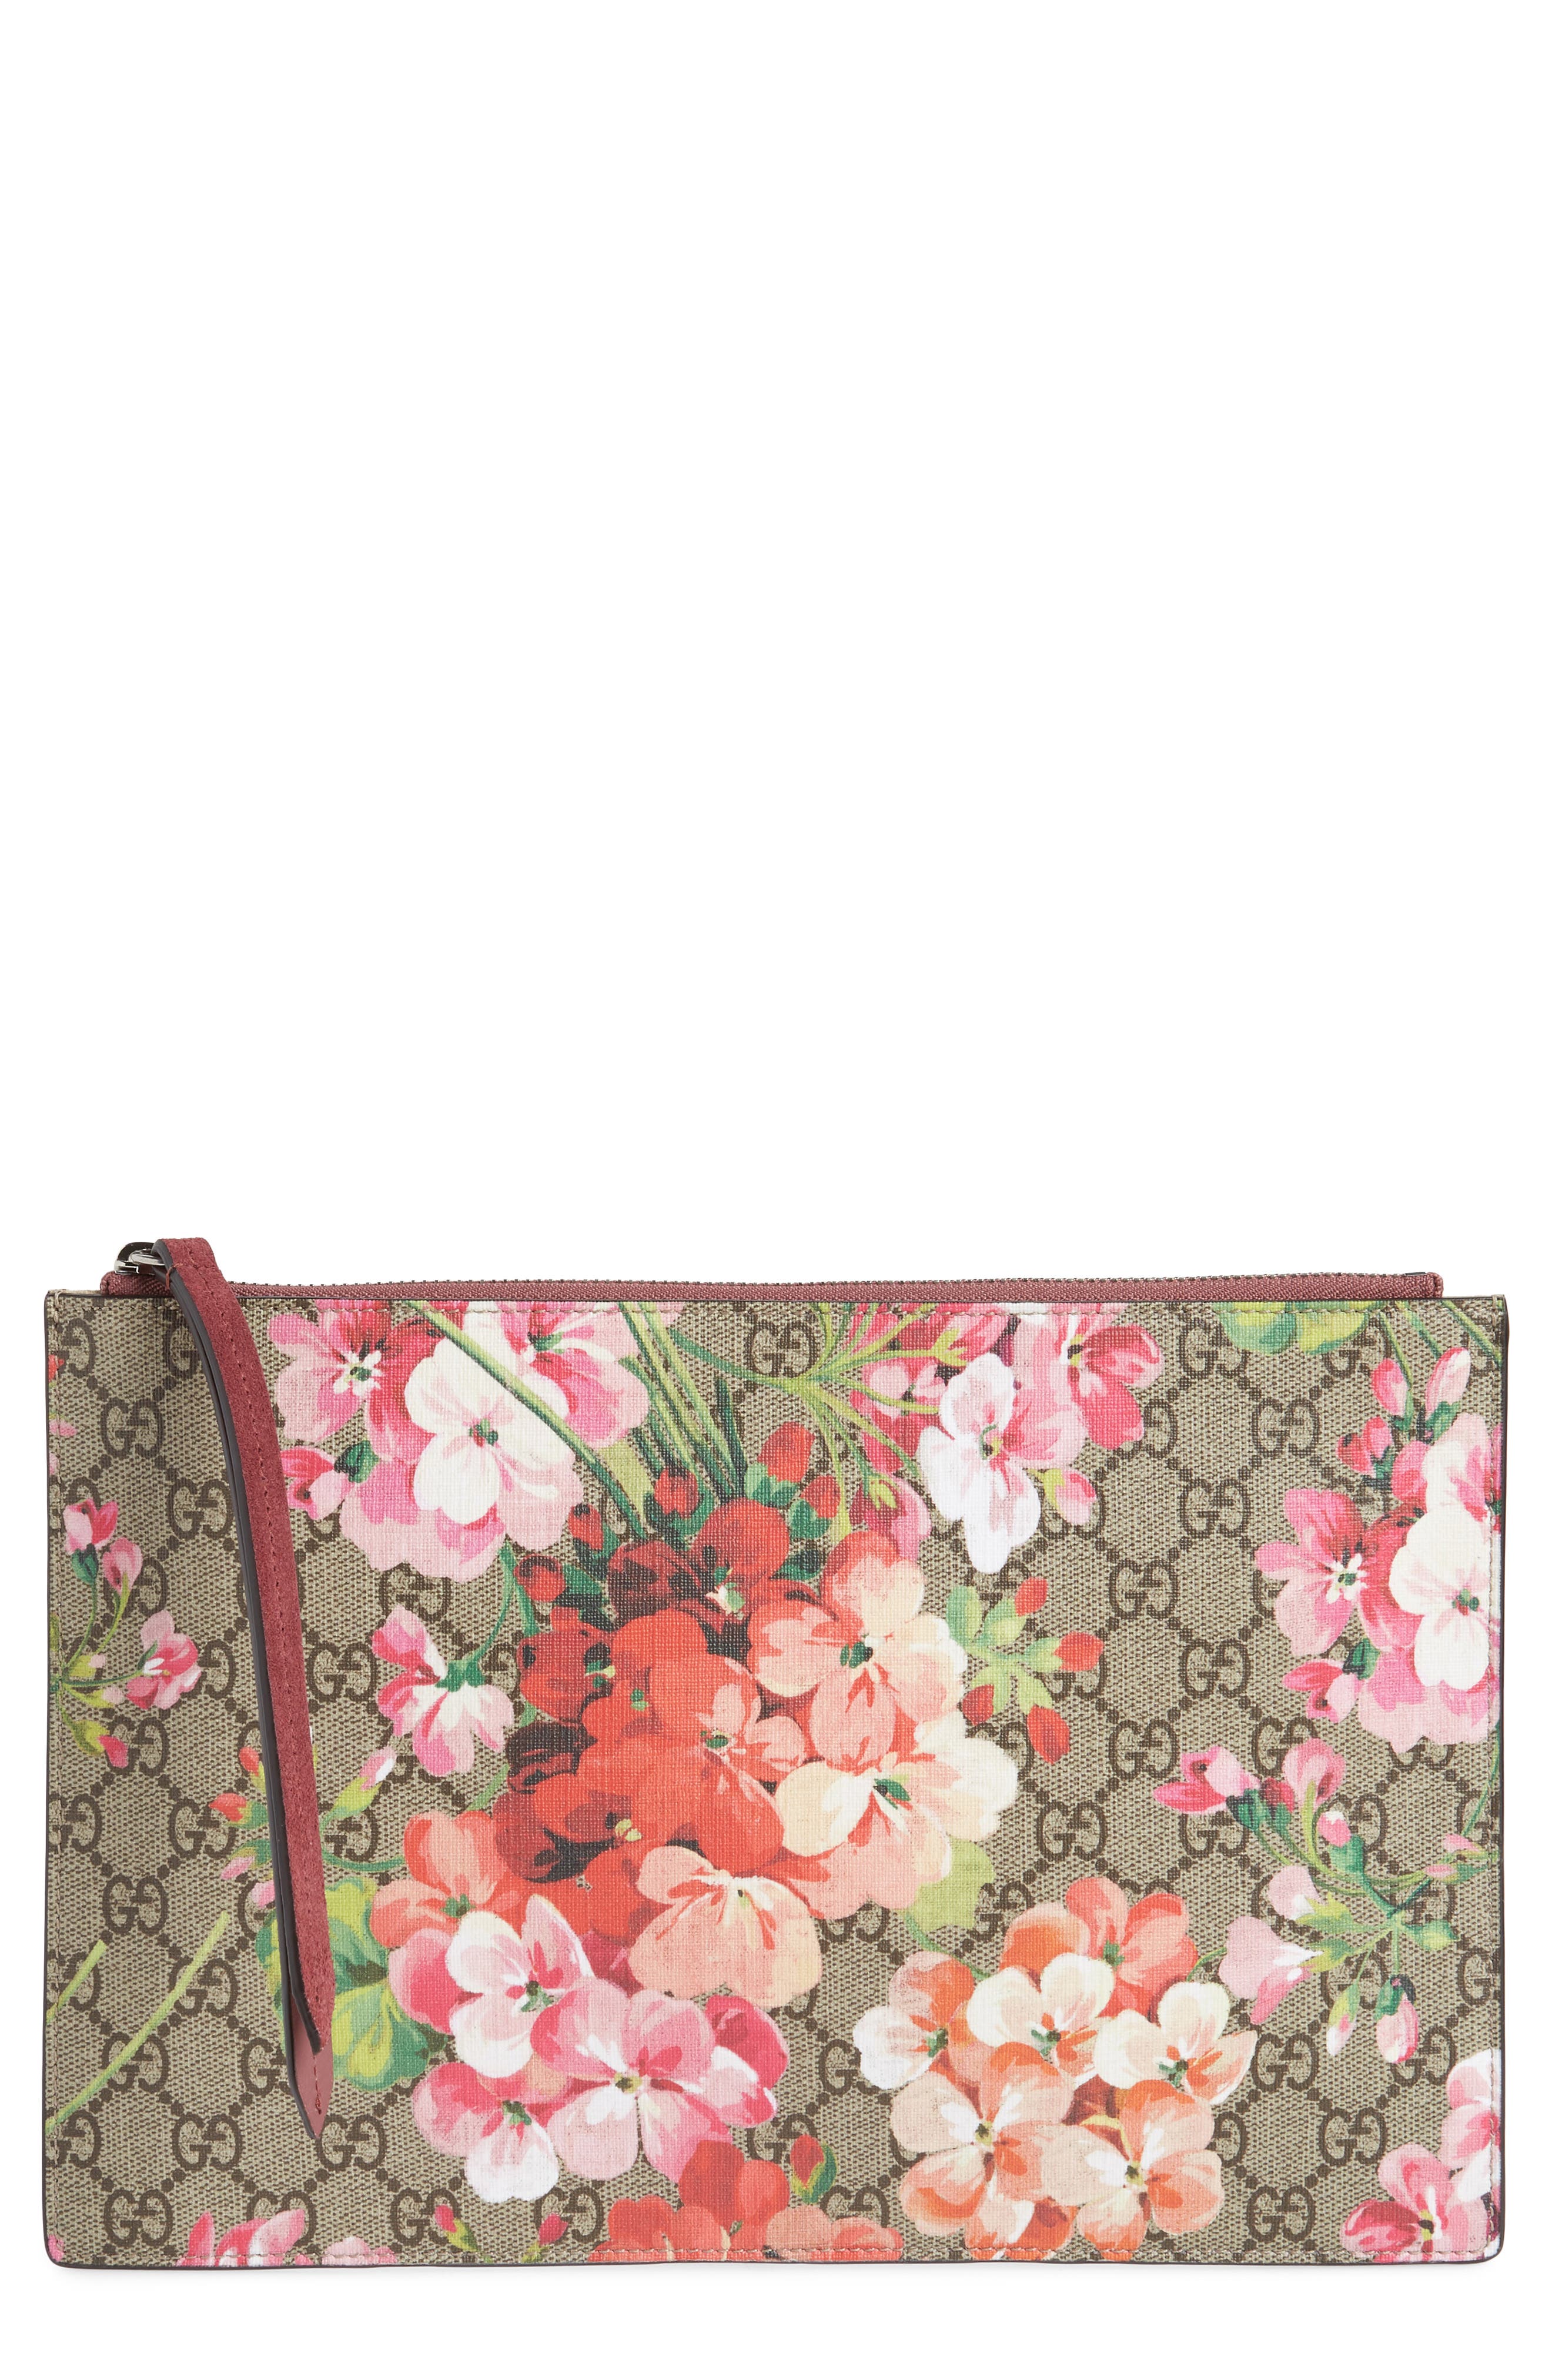 Gucci GG Blooms Large Canvas \u0026 Suede 